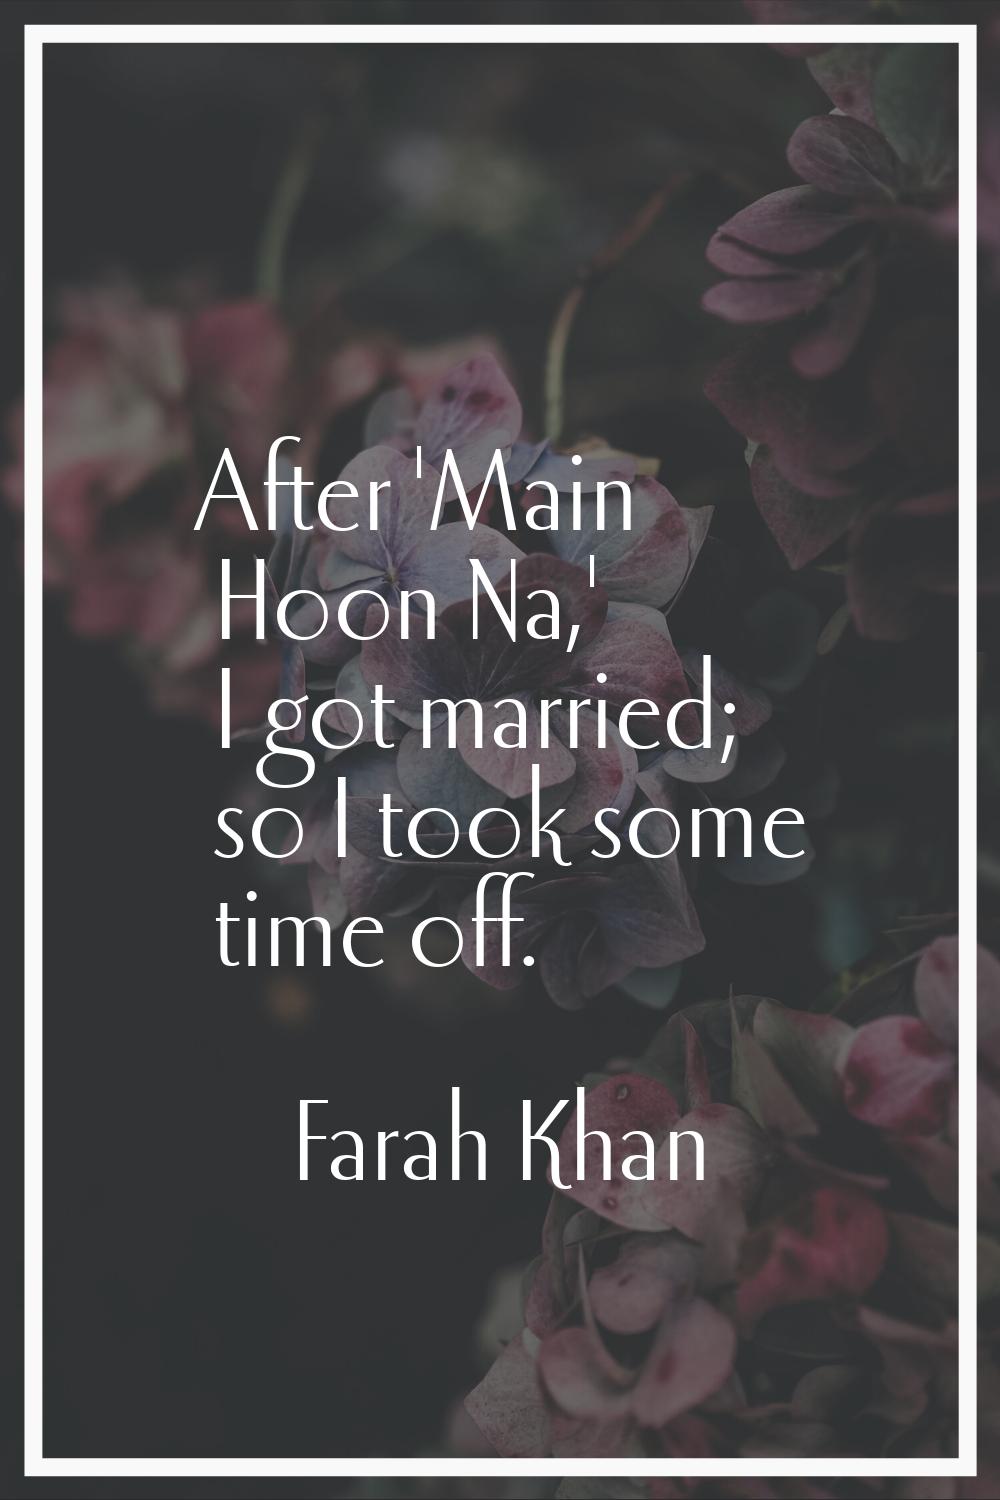 After 'Main Hoon Na,' I got married; so I took some time off.